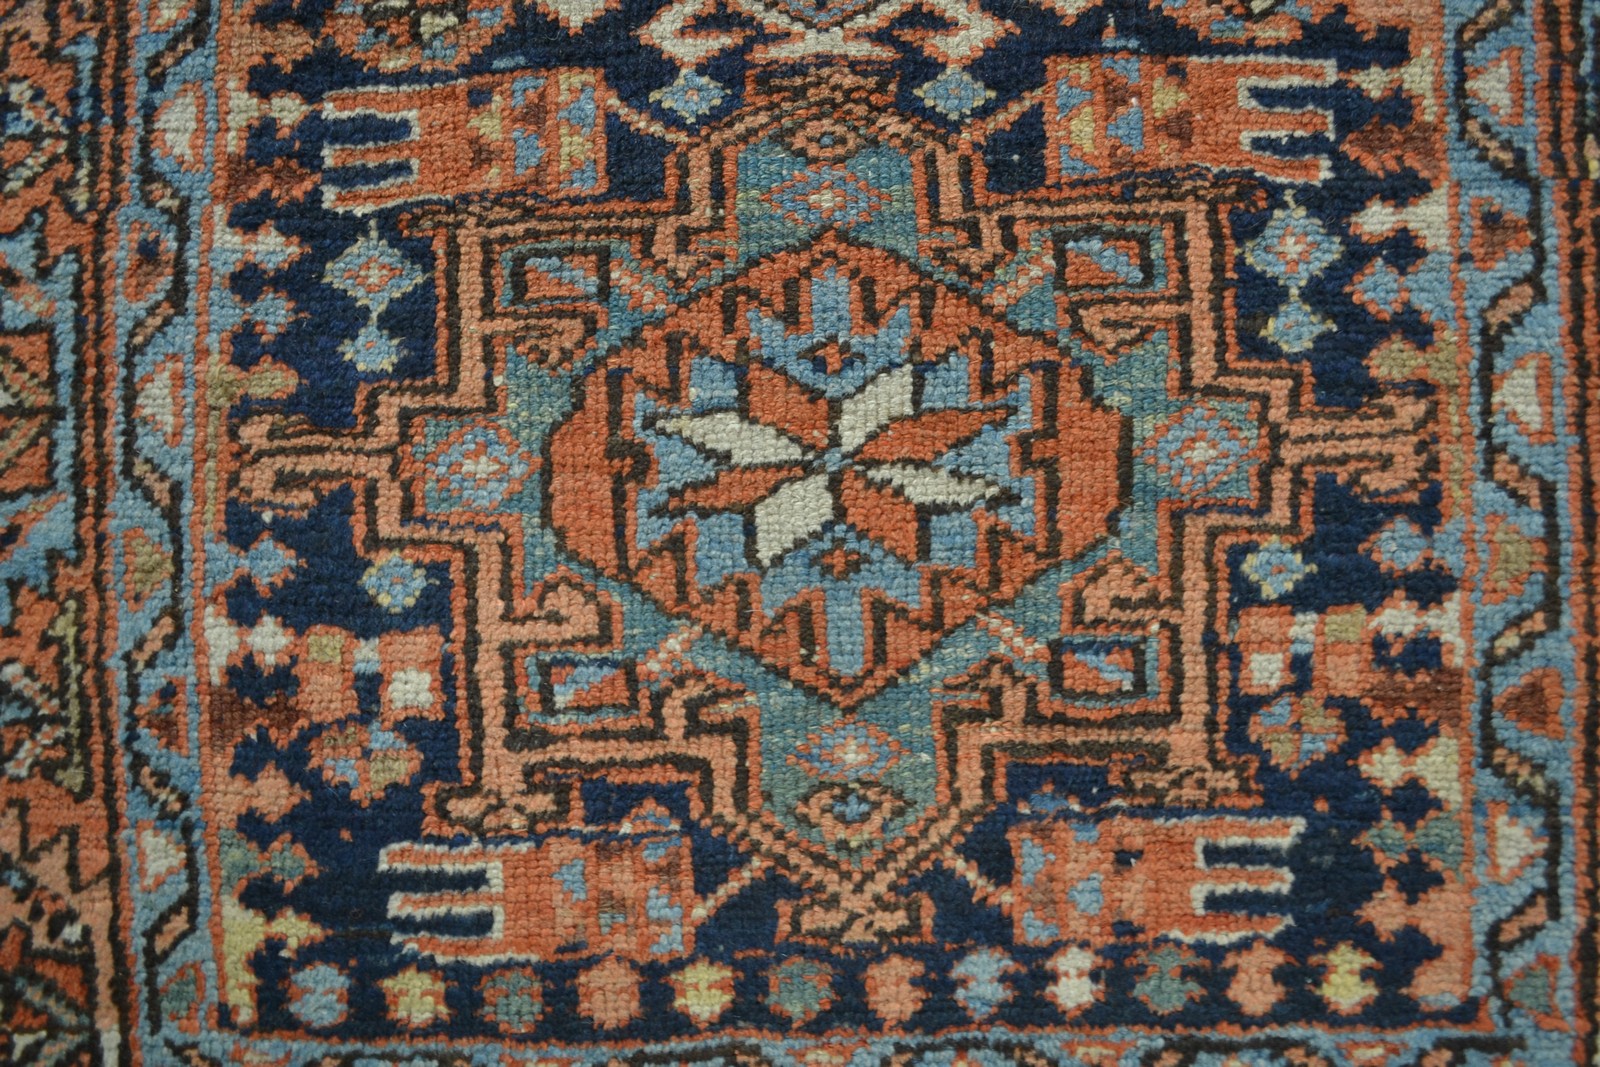 Karaja rug, north west Persia, about 1920s, 4ft. 4in. x 3ft. 1in. 1.32m. x 0.94m. Slight loss to top - Image 7 of 7